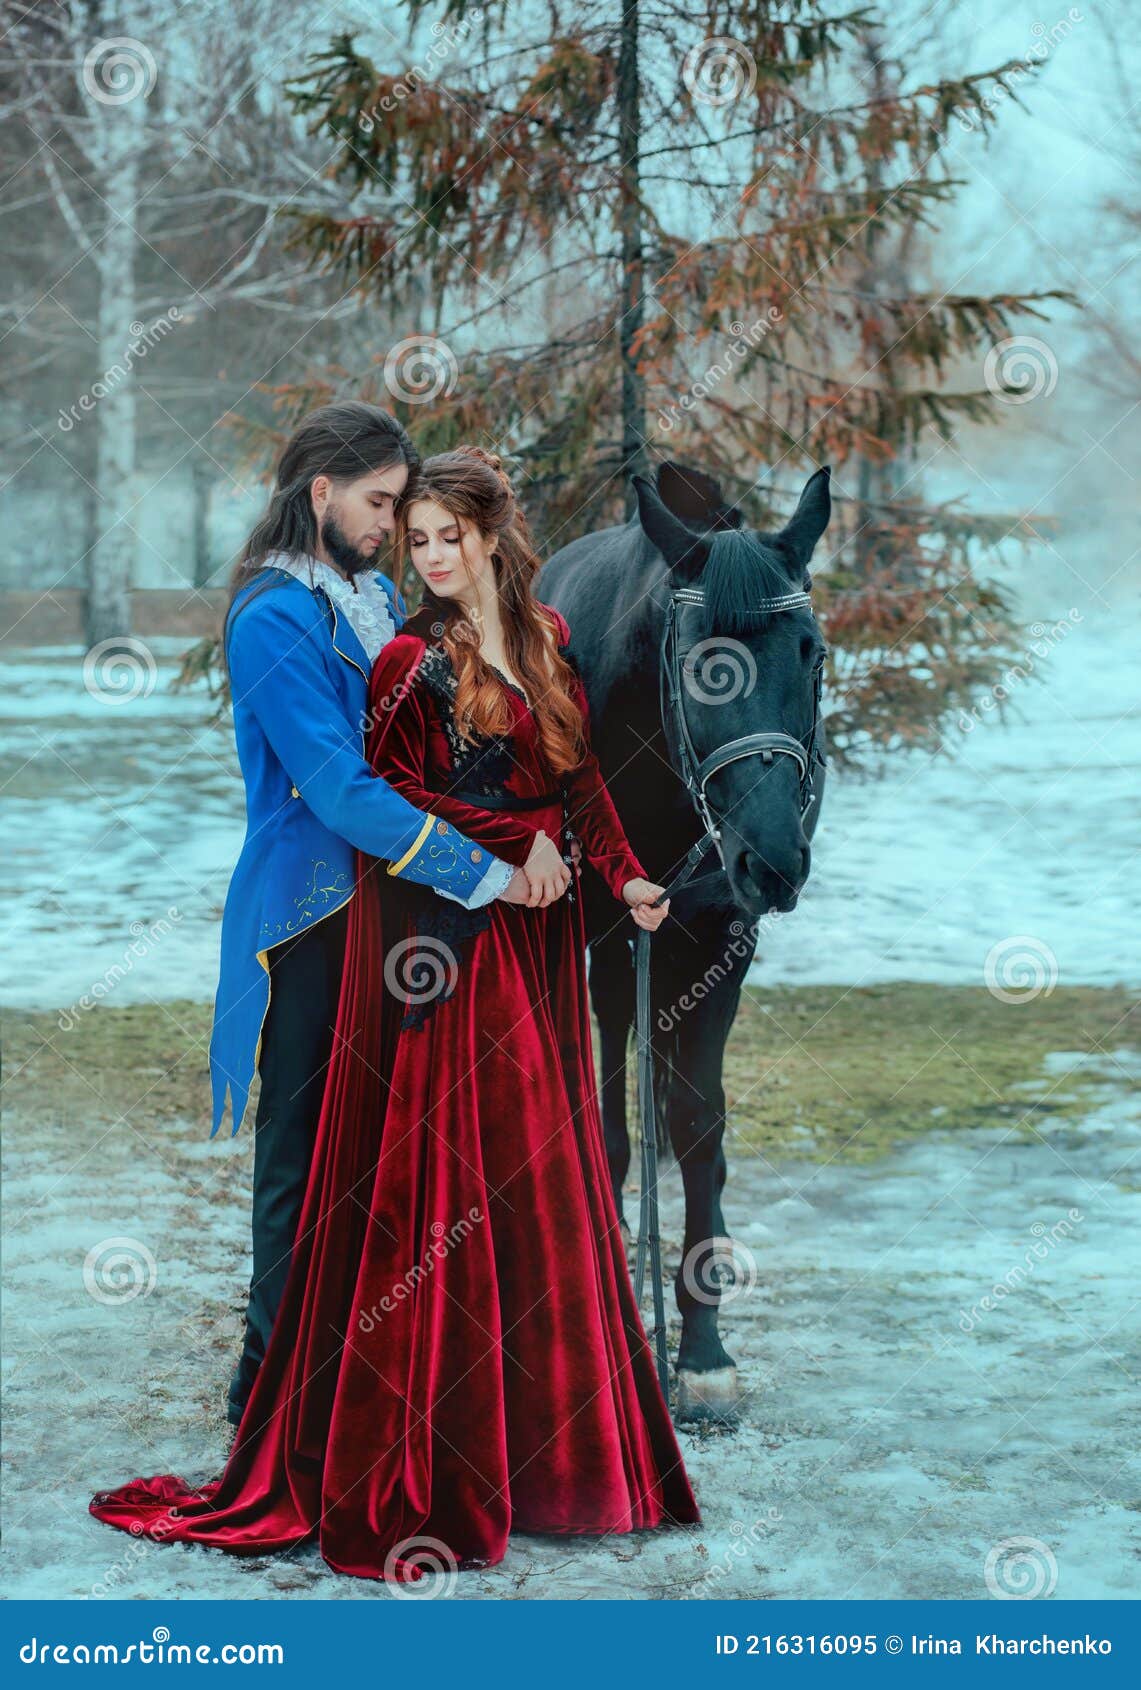 Medieval Couple in Love Man and Woman Hugging in Winter Forest. Vintage